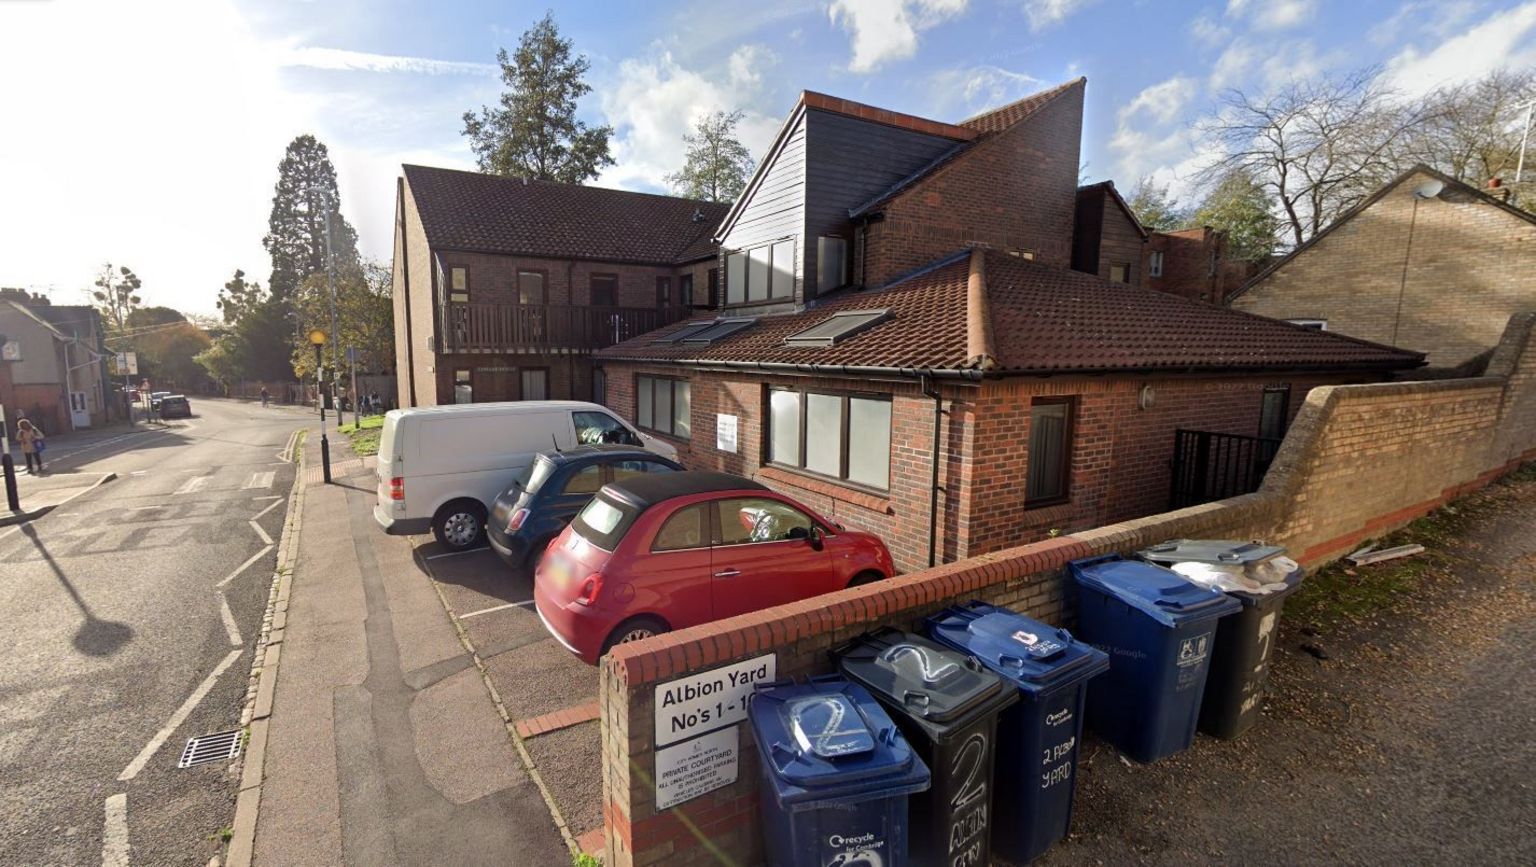 Edward House care home with cars parked outsideside